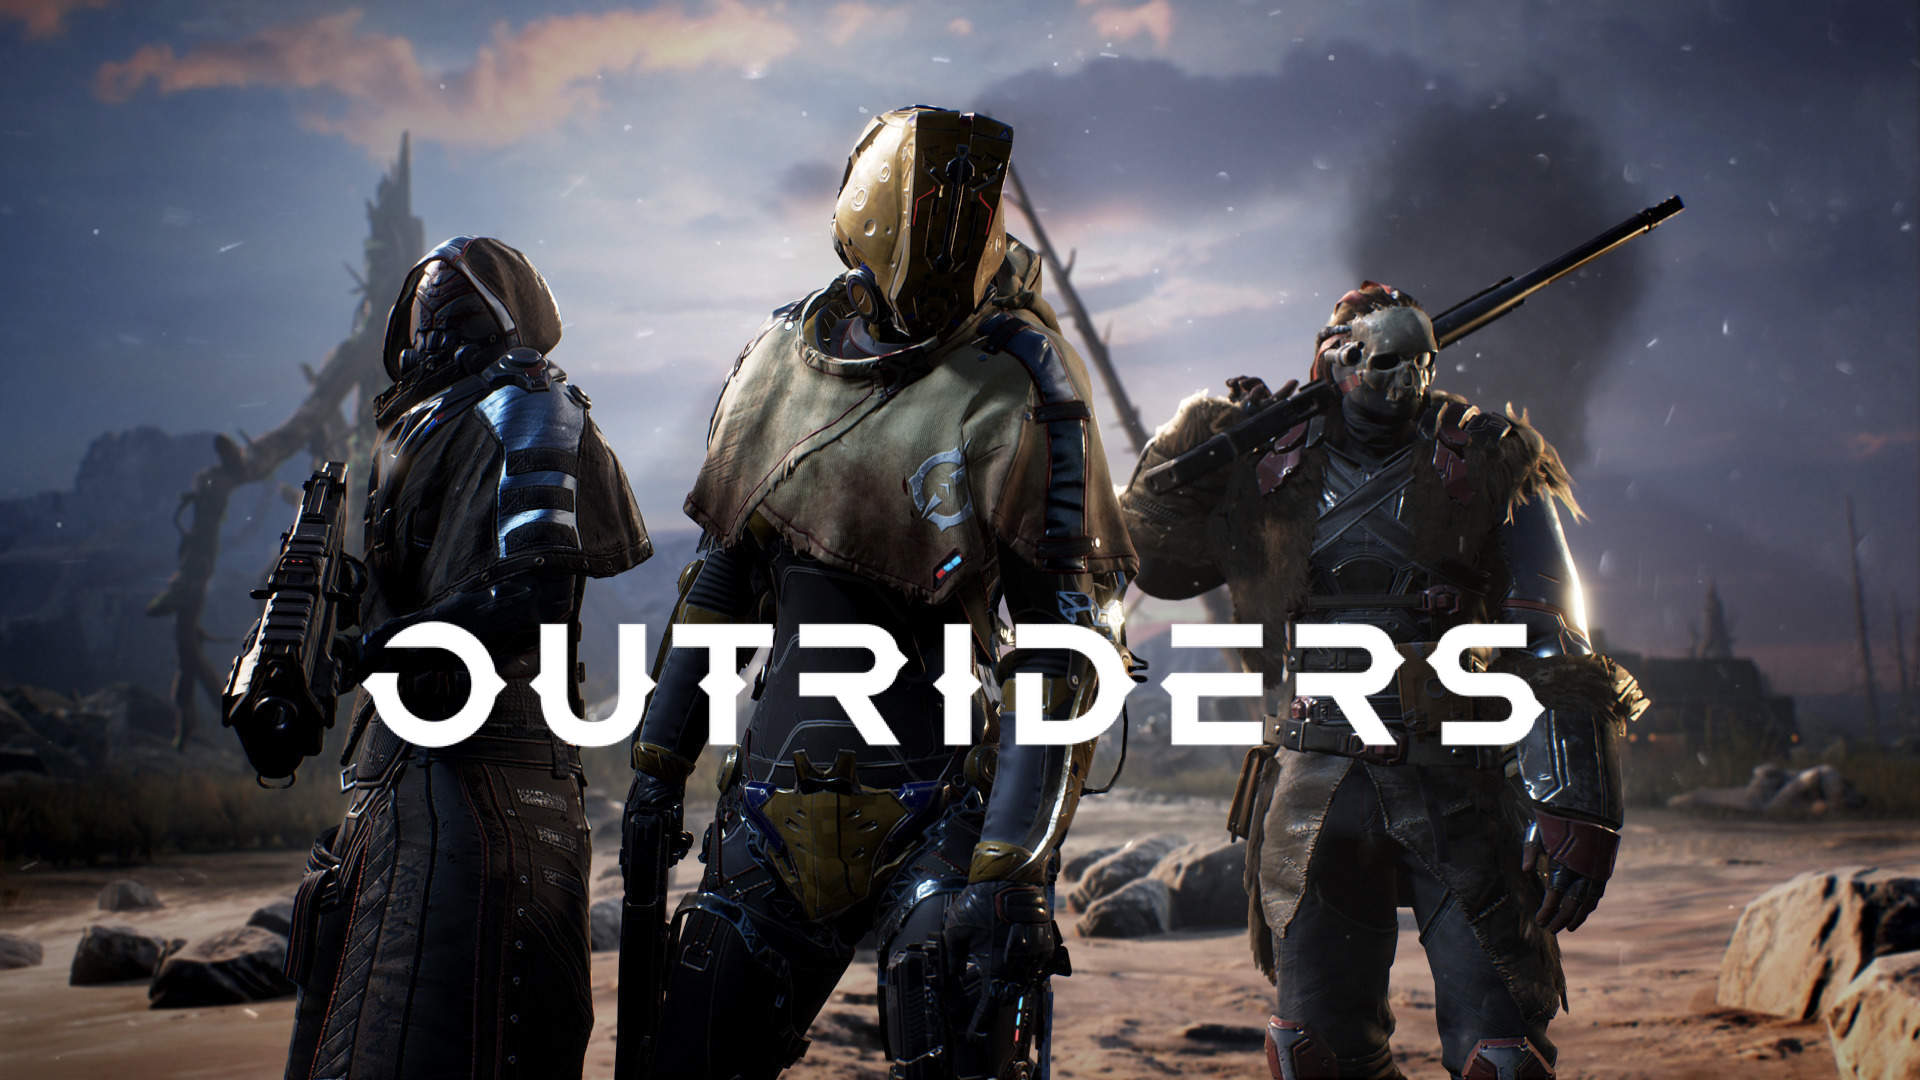 Outriders Videos Showcase Technomancer, Co Op Gameplay, And Devastator Abilities